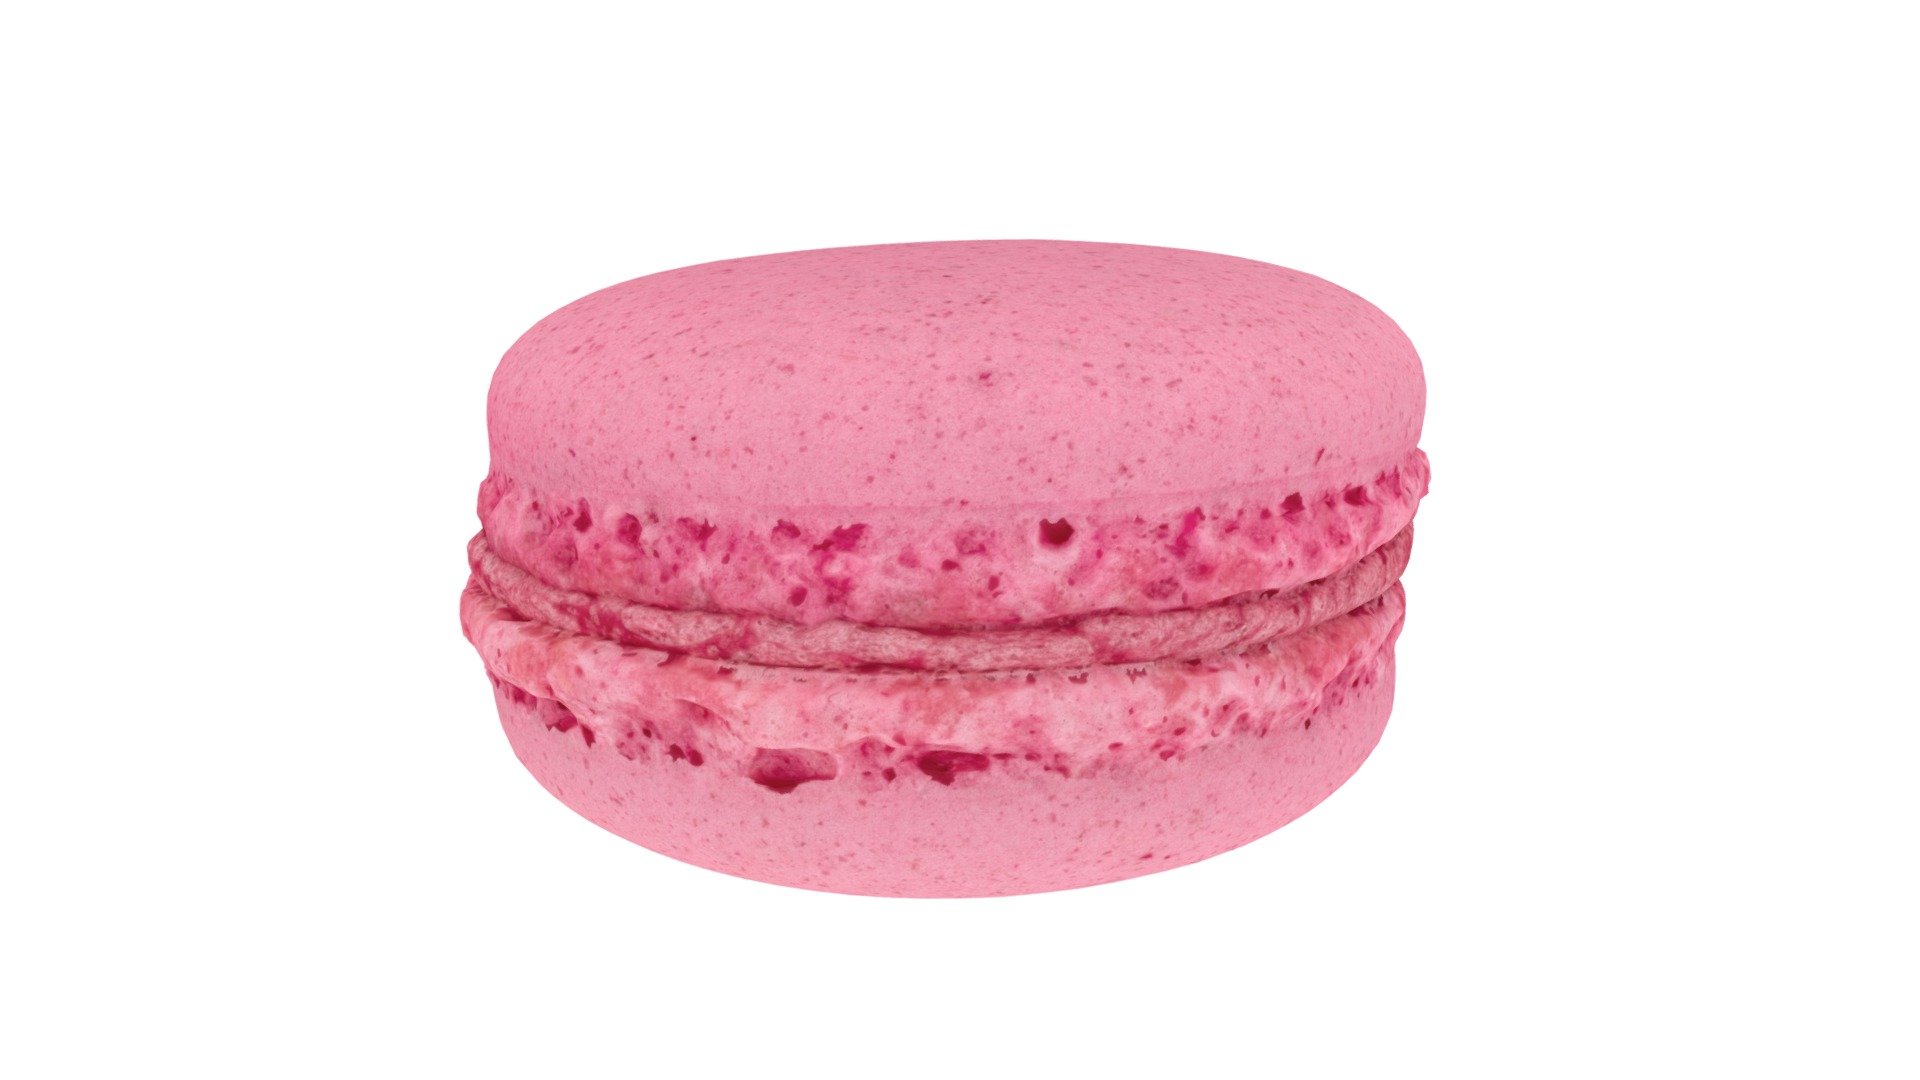 Highly detailed, photorealistic, 3d scanned model of a raspberry macaron. 8k textures maps, optimized topology and uv unwrapped.

Model shown here is lowpoly with diffuse map only and 4k texture size.

This model is available at www.thecreativecrops.com 3d model